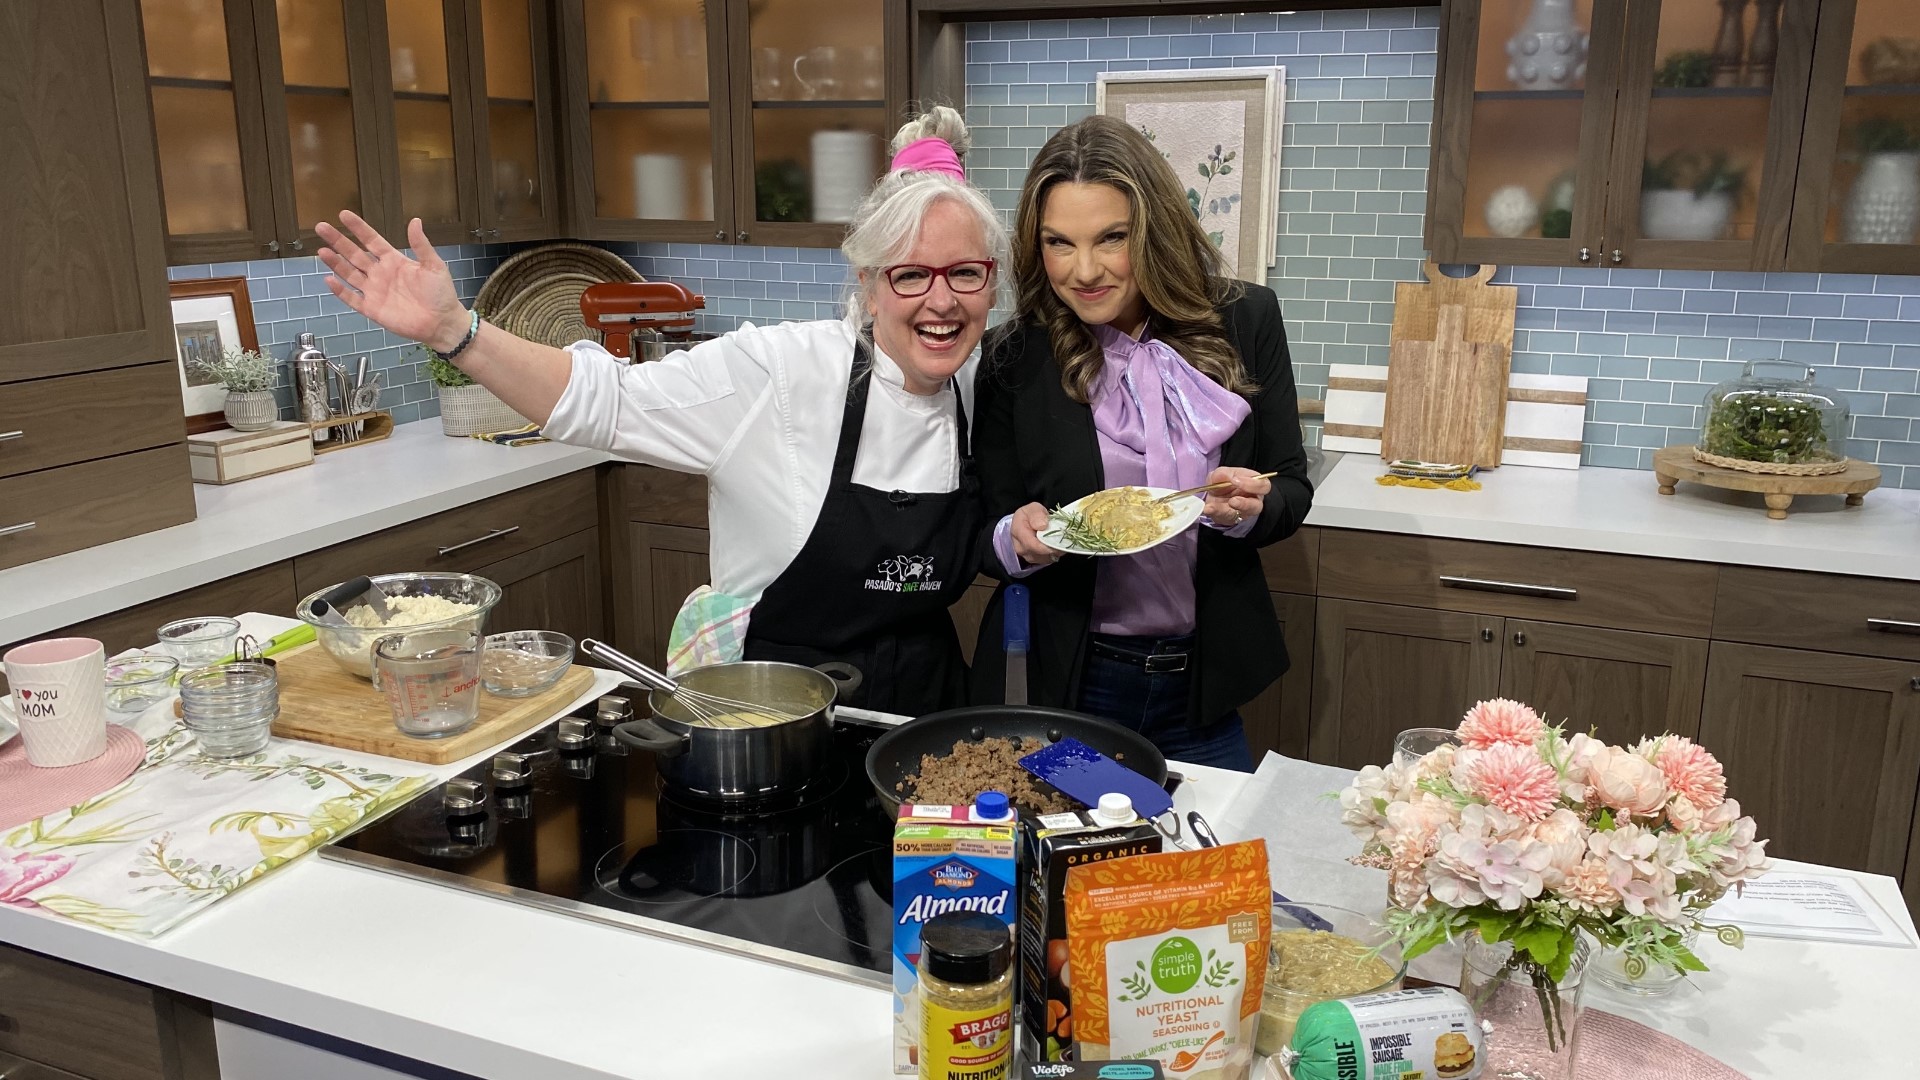 Chef Amy Webster of Rainy Day Vegan shows Amity how to make a vegan version of a brunch staple.